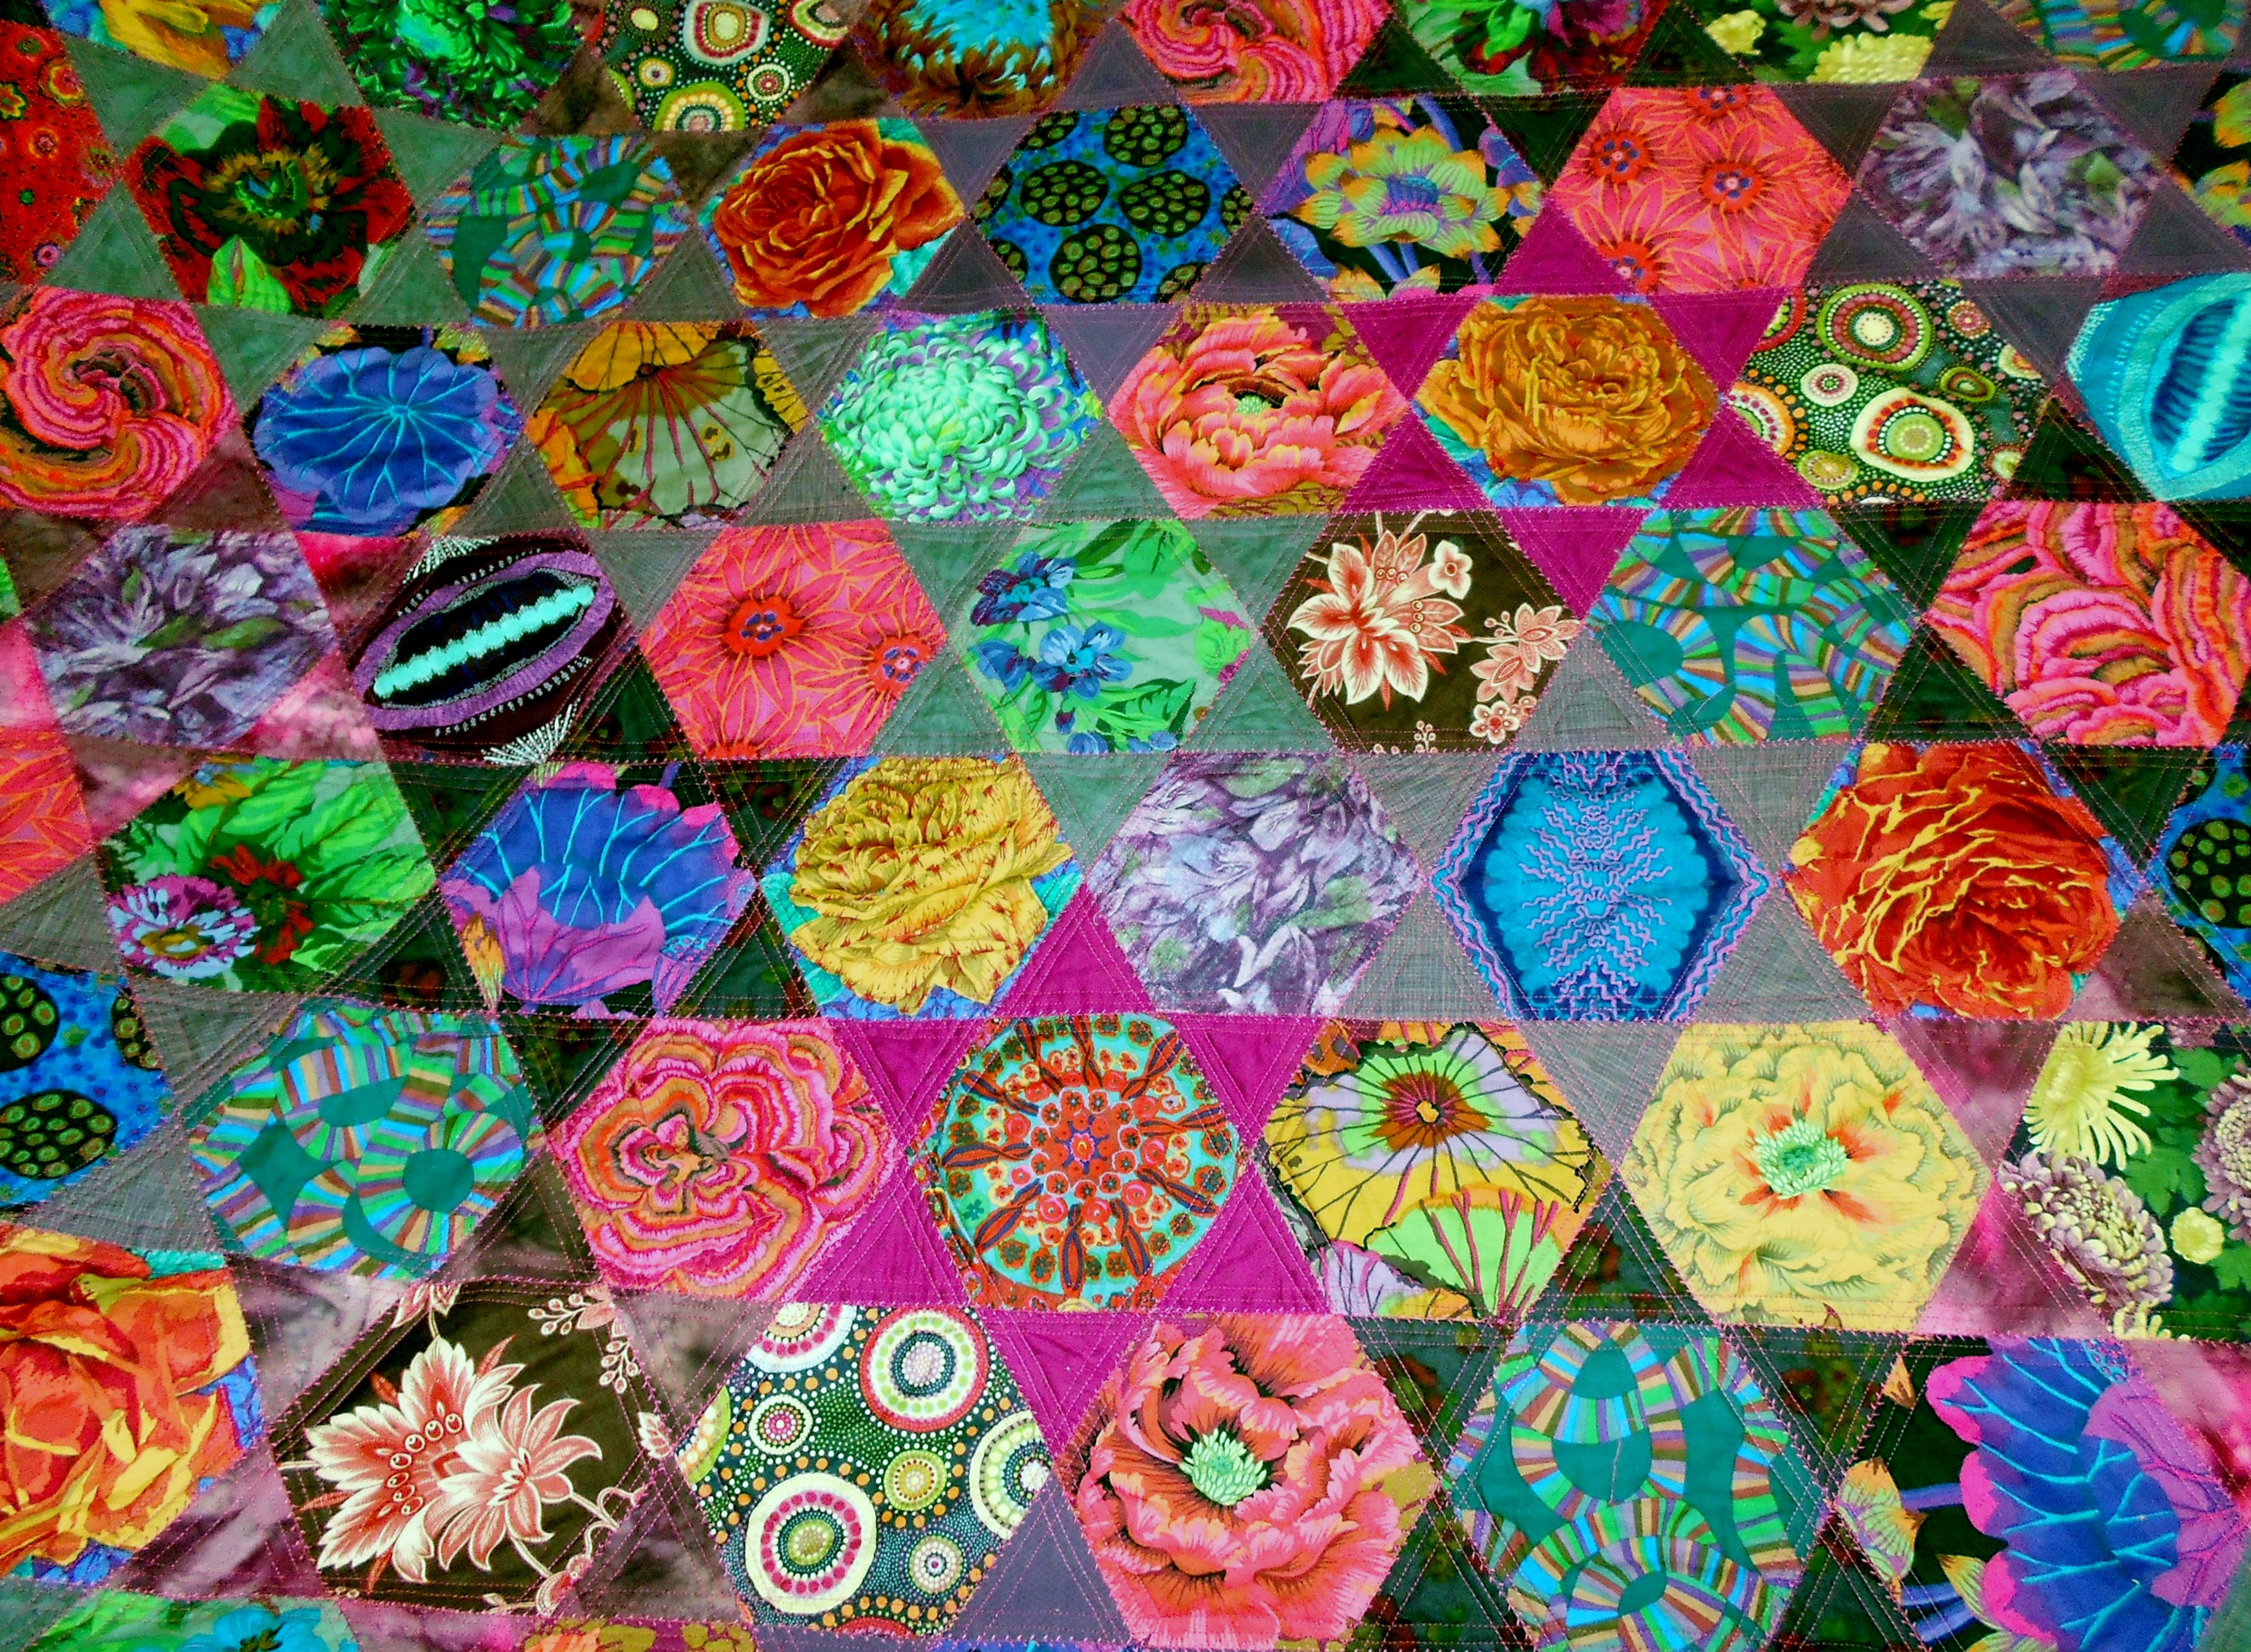 (detail) completed Kaffe Fassett quilt by Gill Roberts